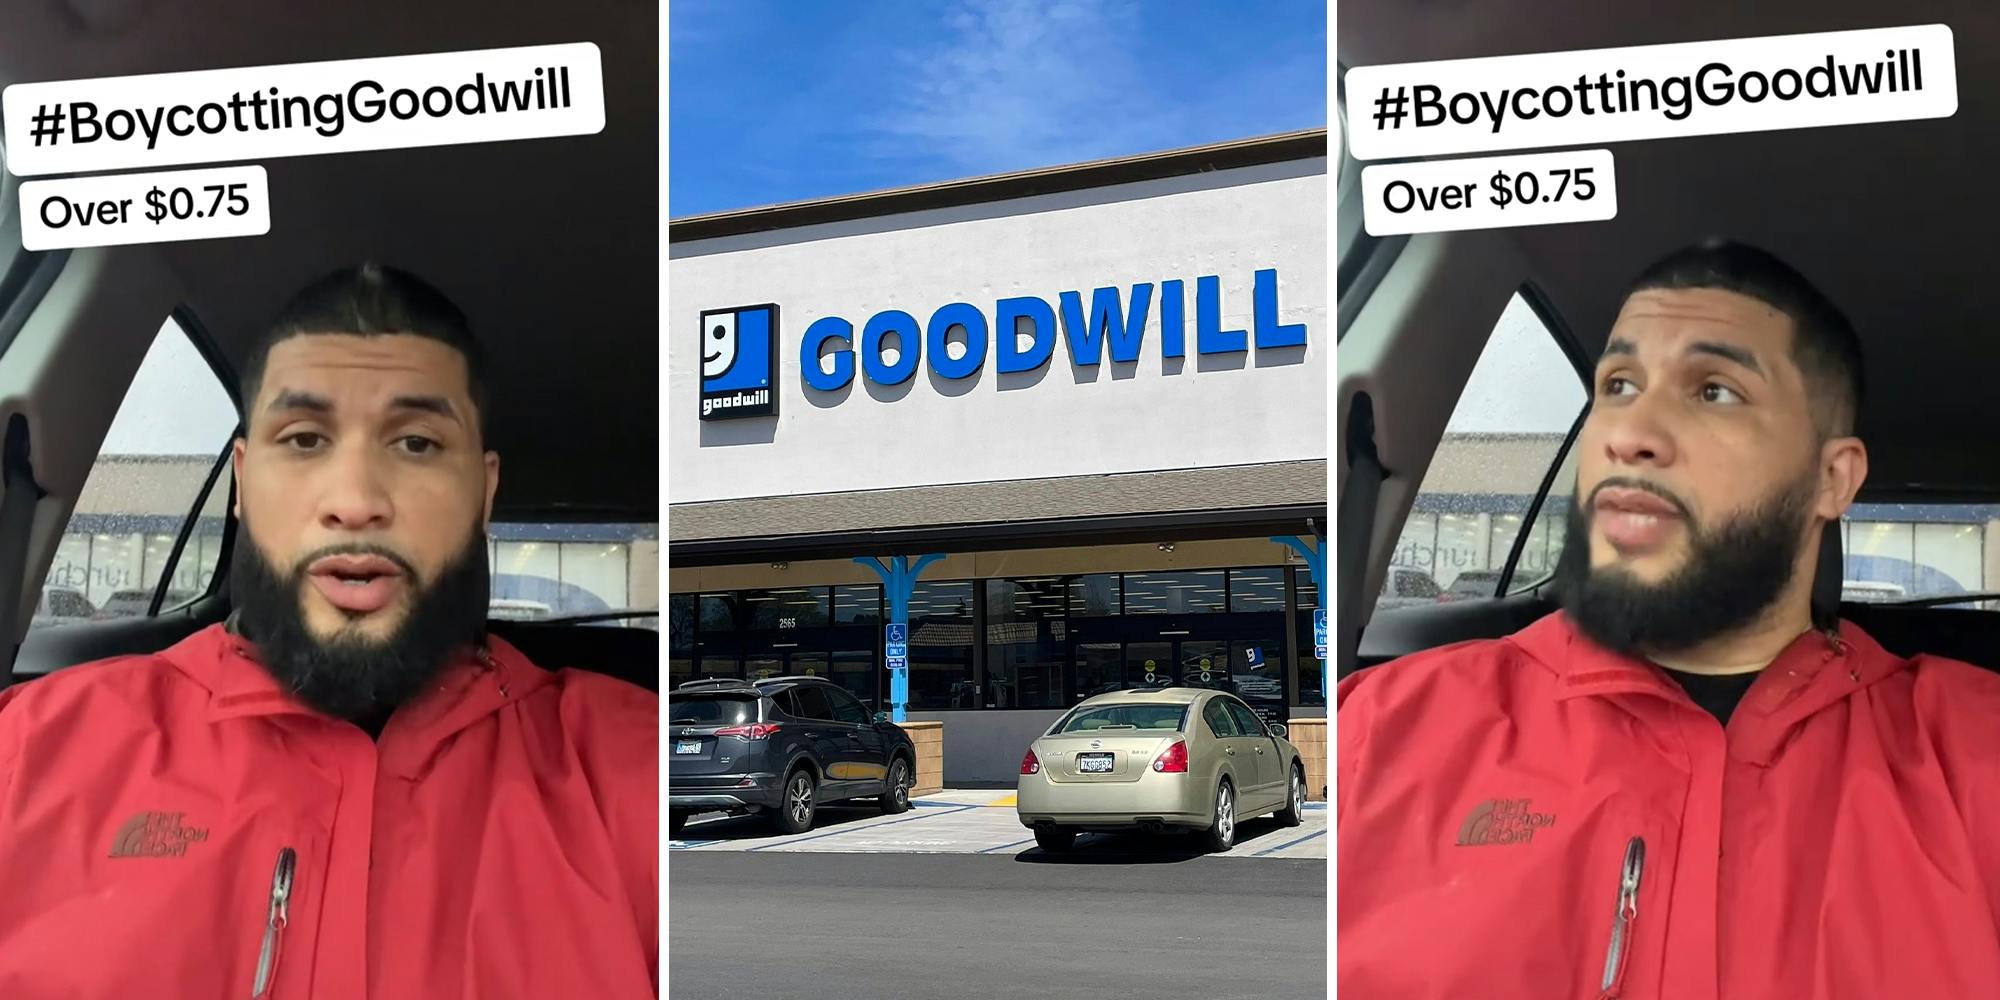 Hold those thongs! After $1.2 million trash bill, Goodwill encouraging